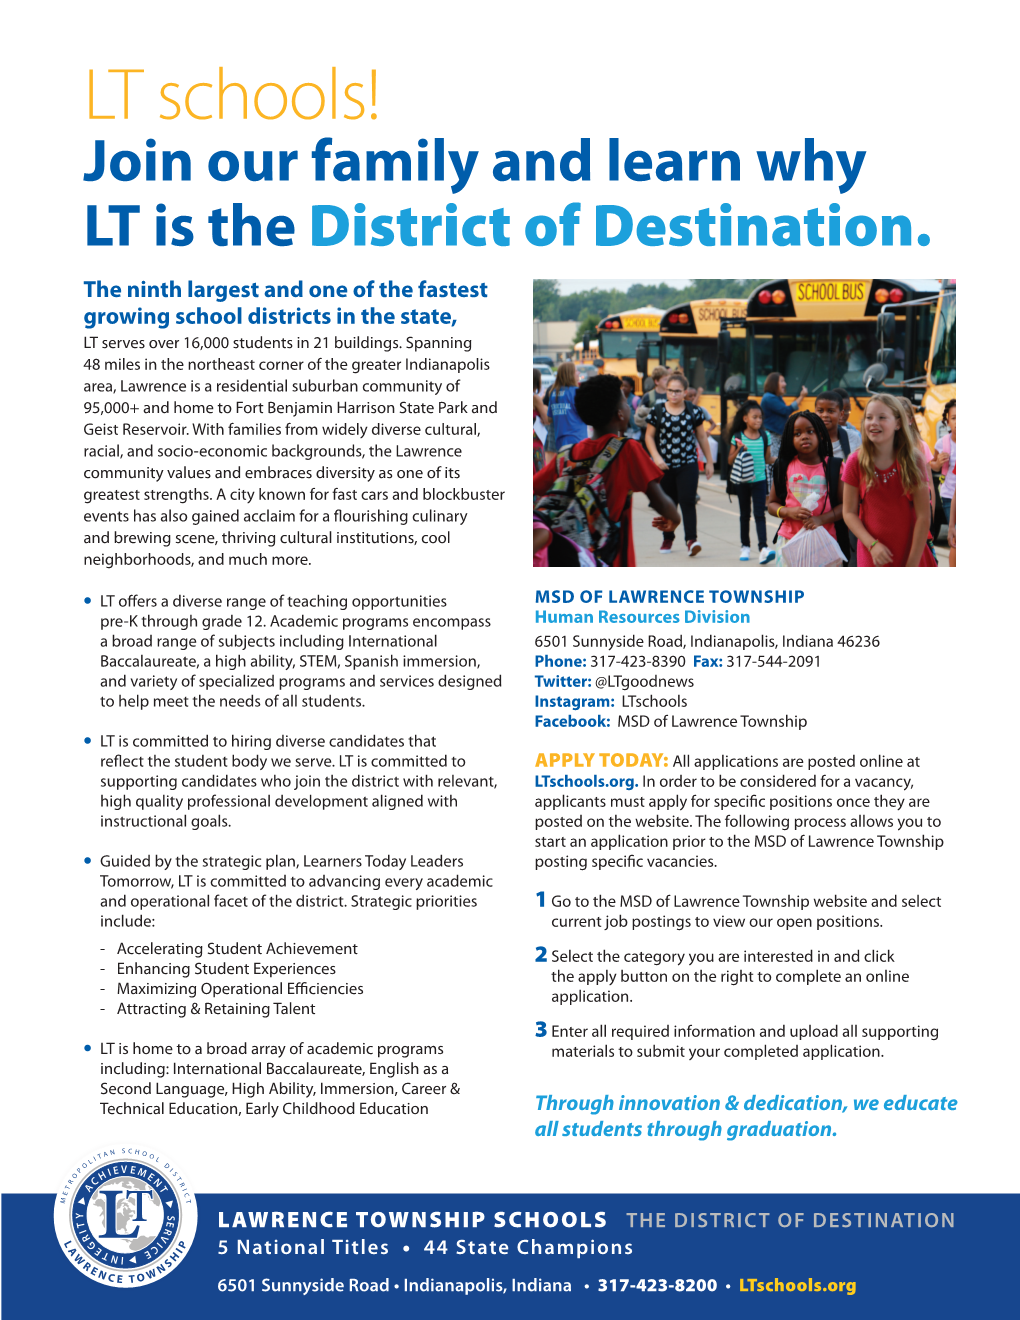 LT Schools! Join Our Family and Learn Why LT Is the District of Destination